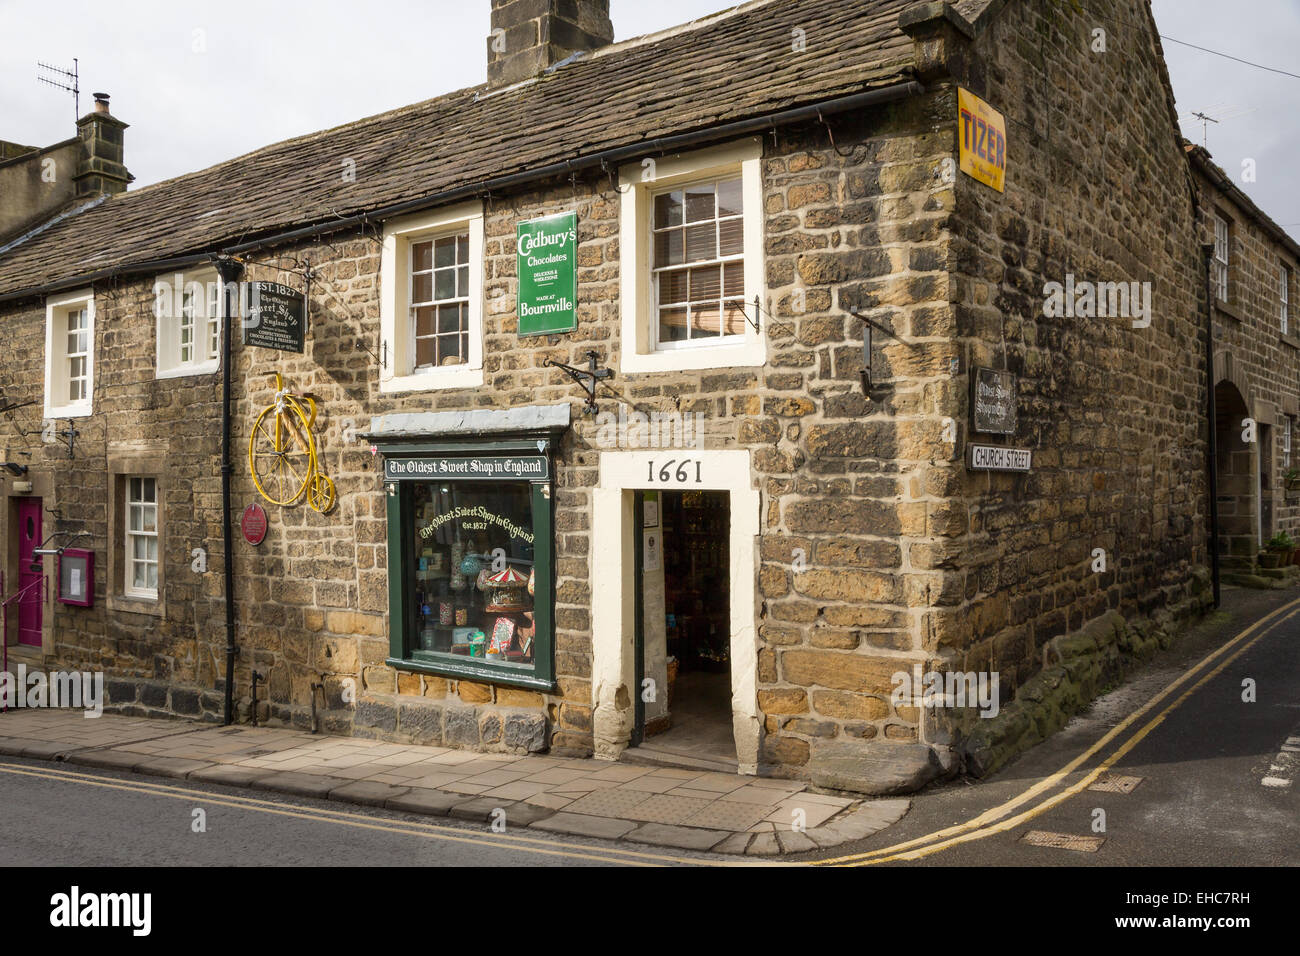 The Oldest Sweet Shop in the World in Pately Bridge, nr Harrogate, North Yorkshire, England. Trading since 1827 Stock Photo